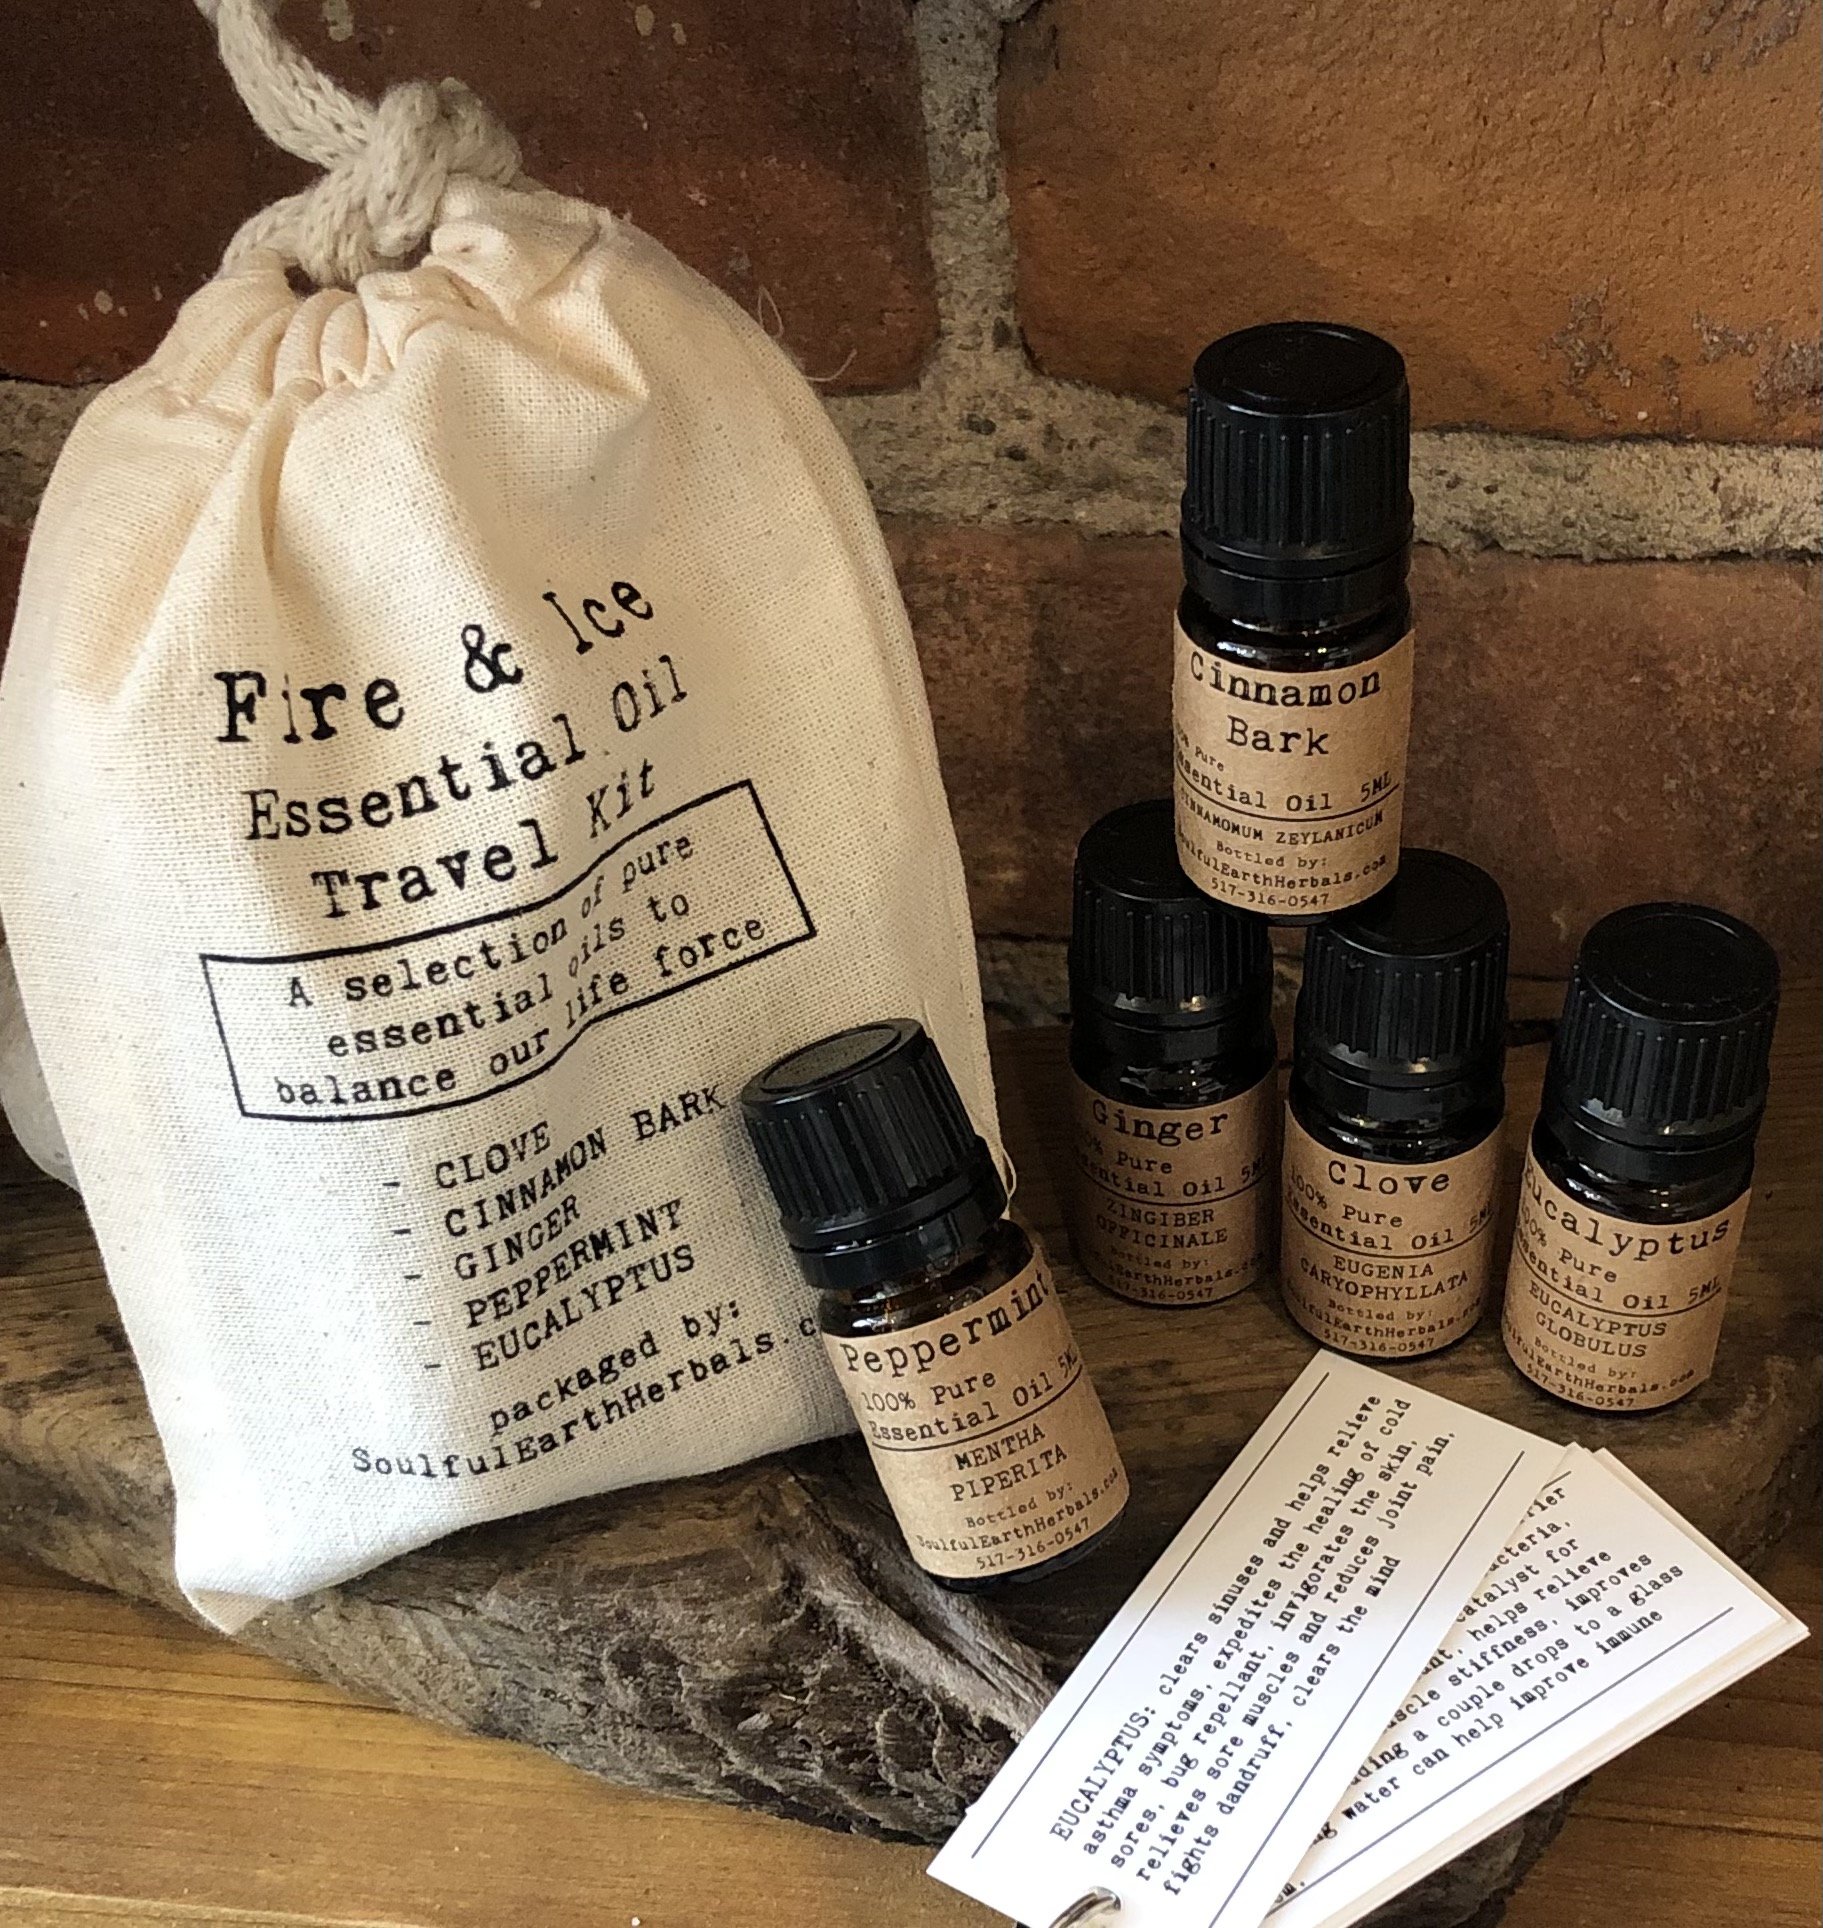 Essential Oil Travel Kit: Fire & Ice